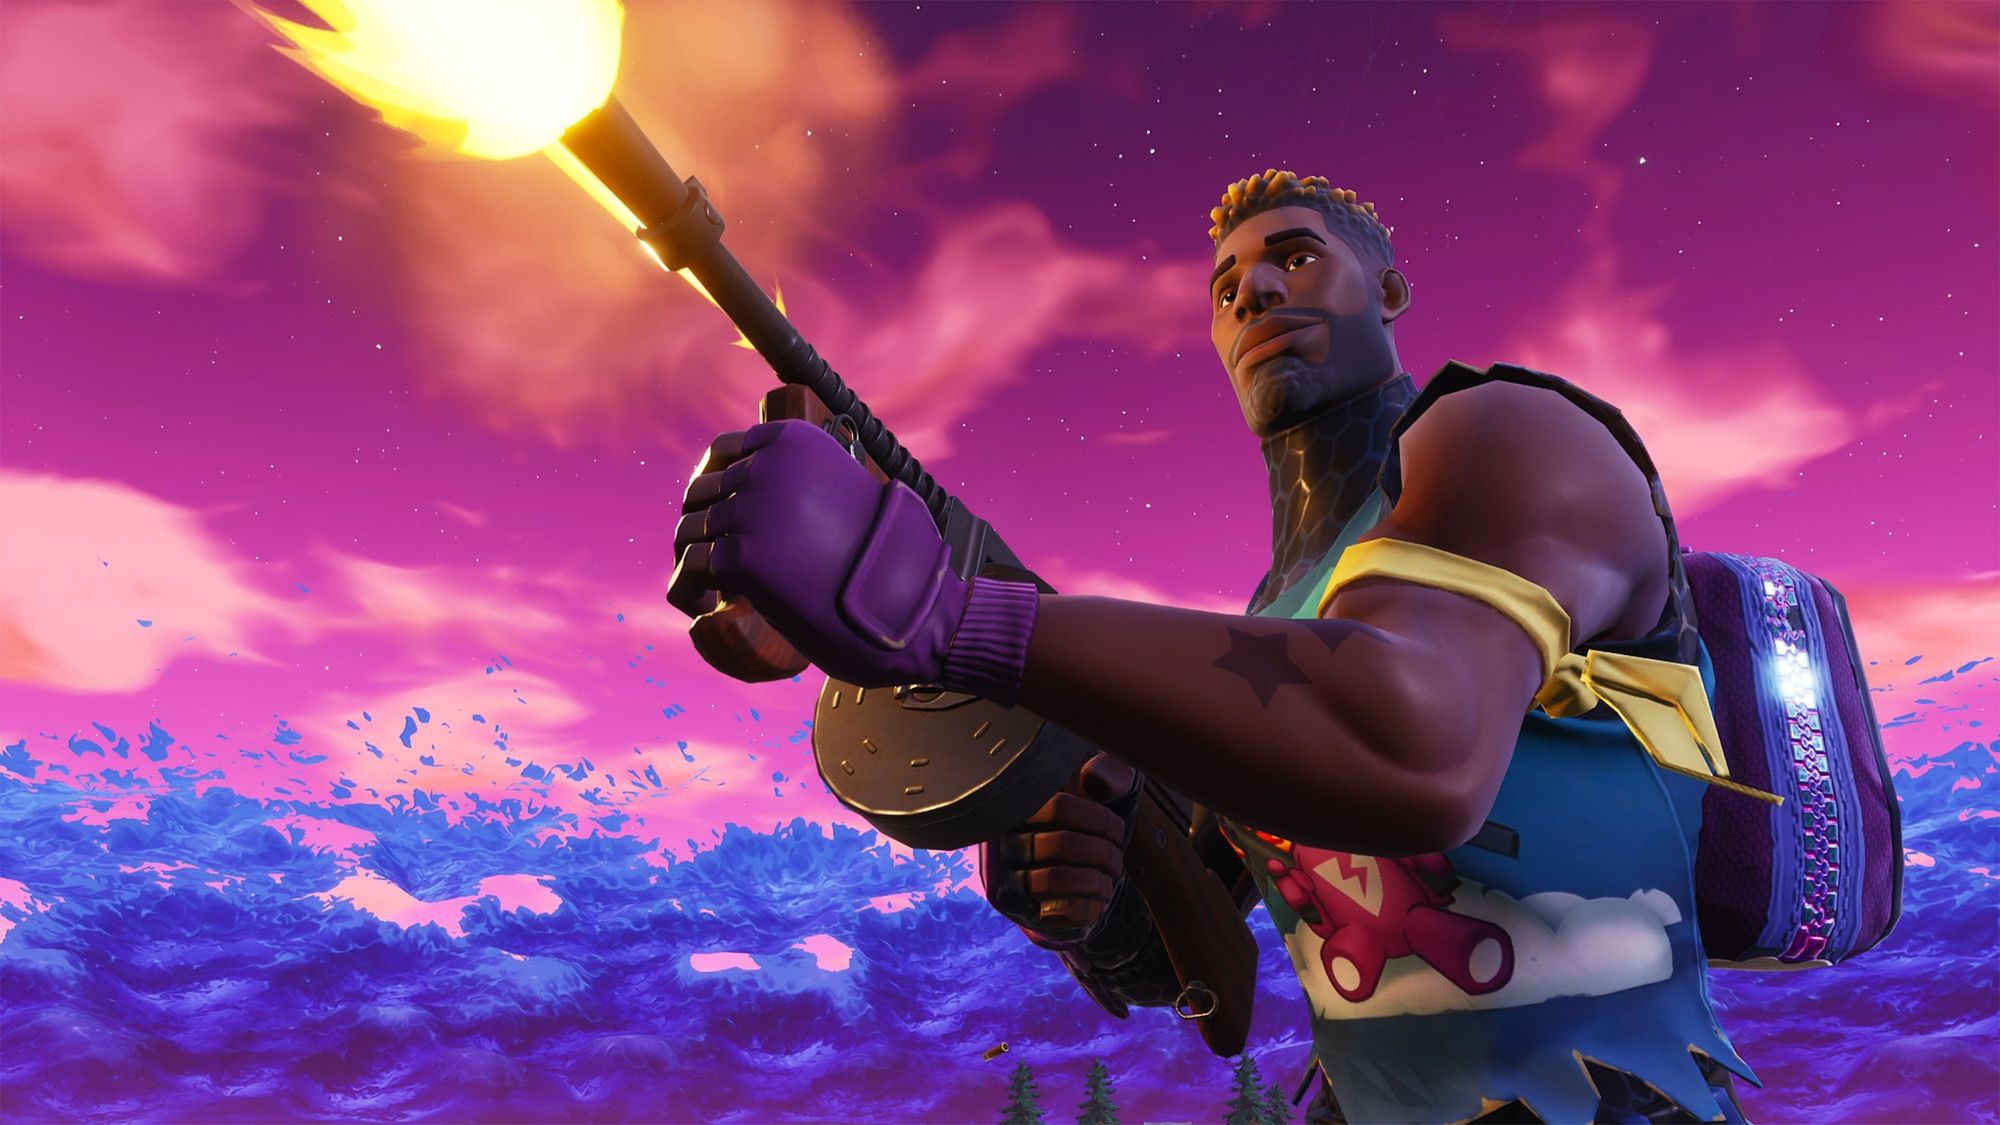 Fortnite Removing Support For Competitive Stretched Resolution On